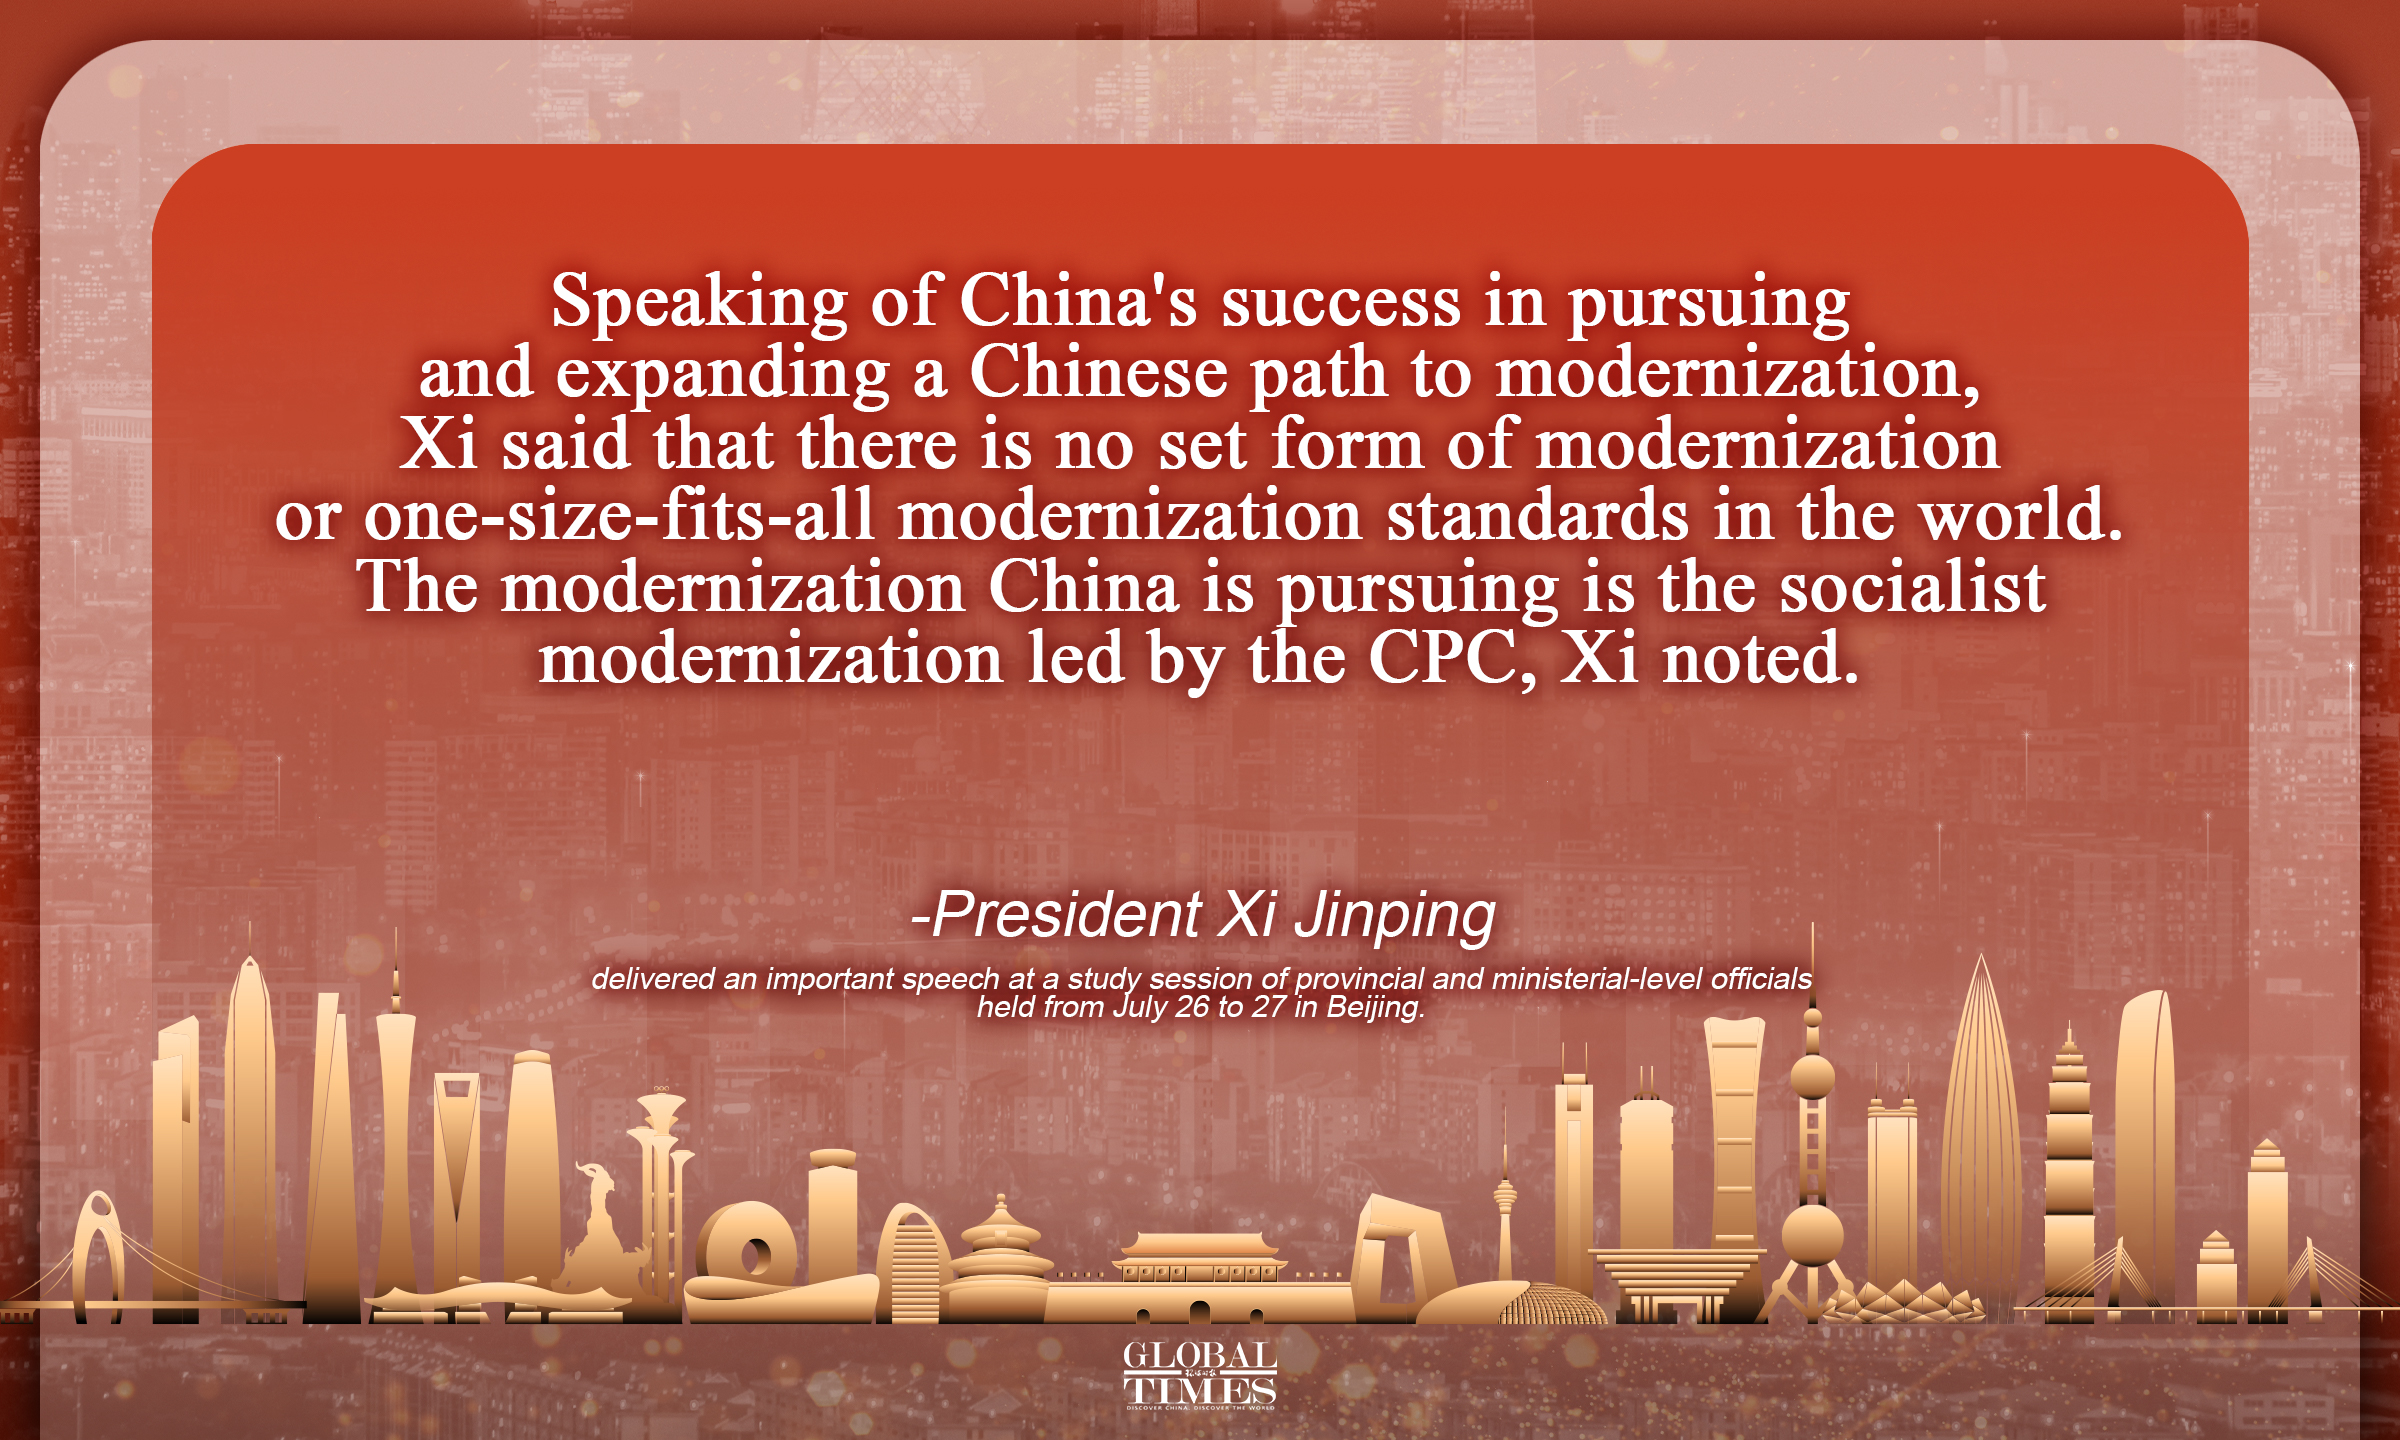 “There is no set form of modernization or one-size-fits-all modernization standards in the world.” President Xi Jinping stressed upholding socialism with Chinese characteristics to build modern socialist country at a study session of provincial and ministerial-level officials. Graphic:GT